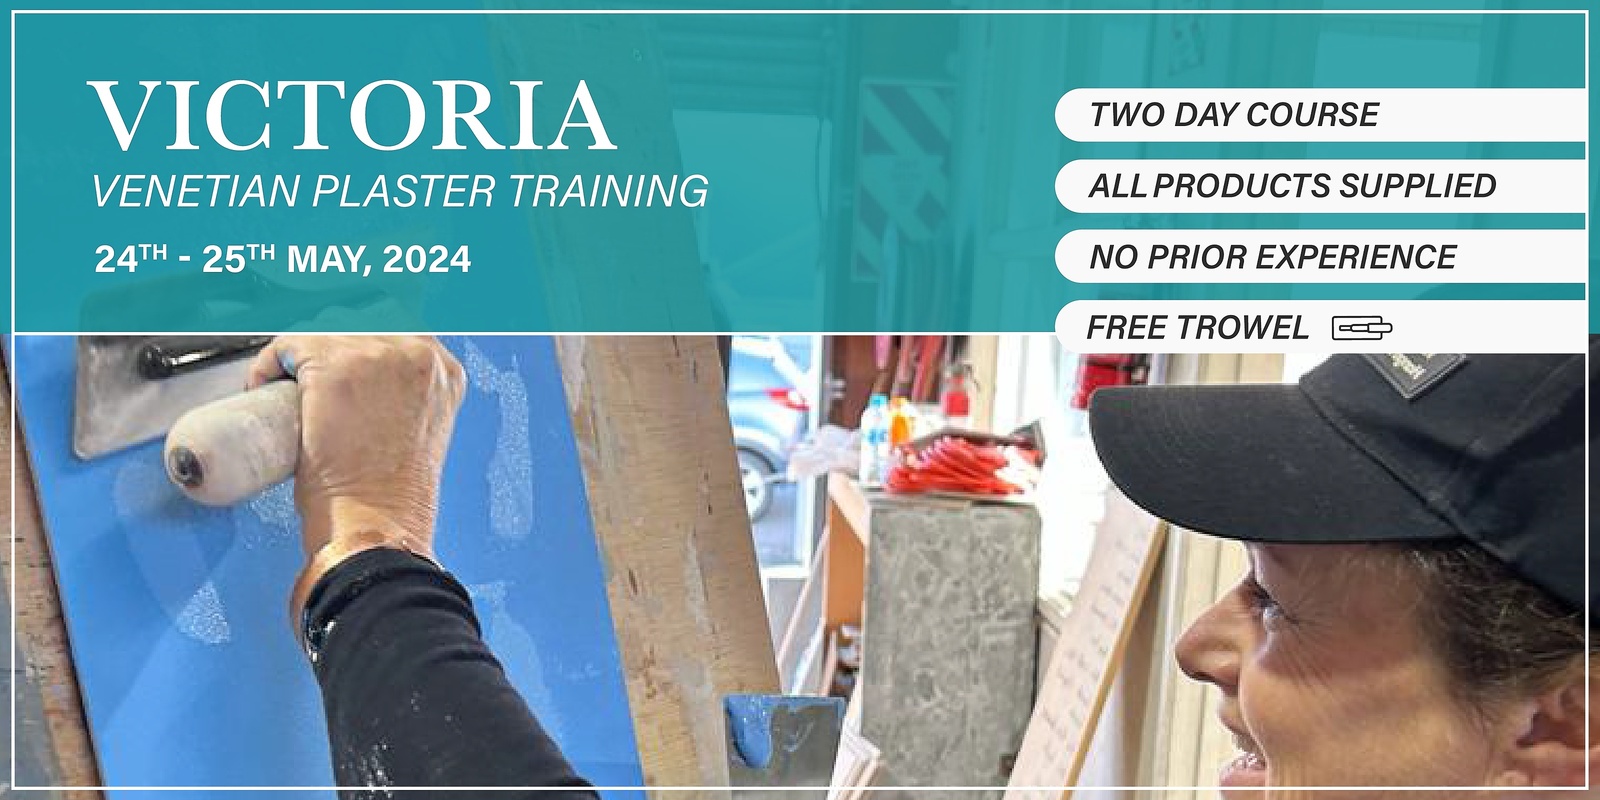 Banner image for Victoria Venetian Plaster Training - (24th - 25th May, 2024)